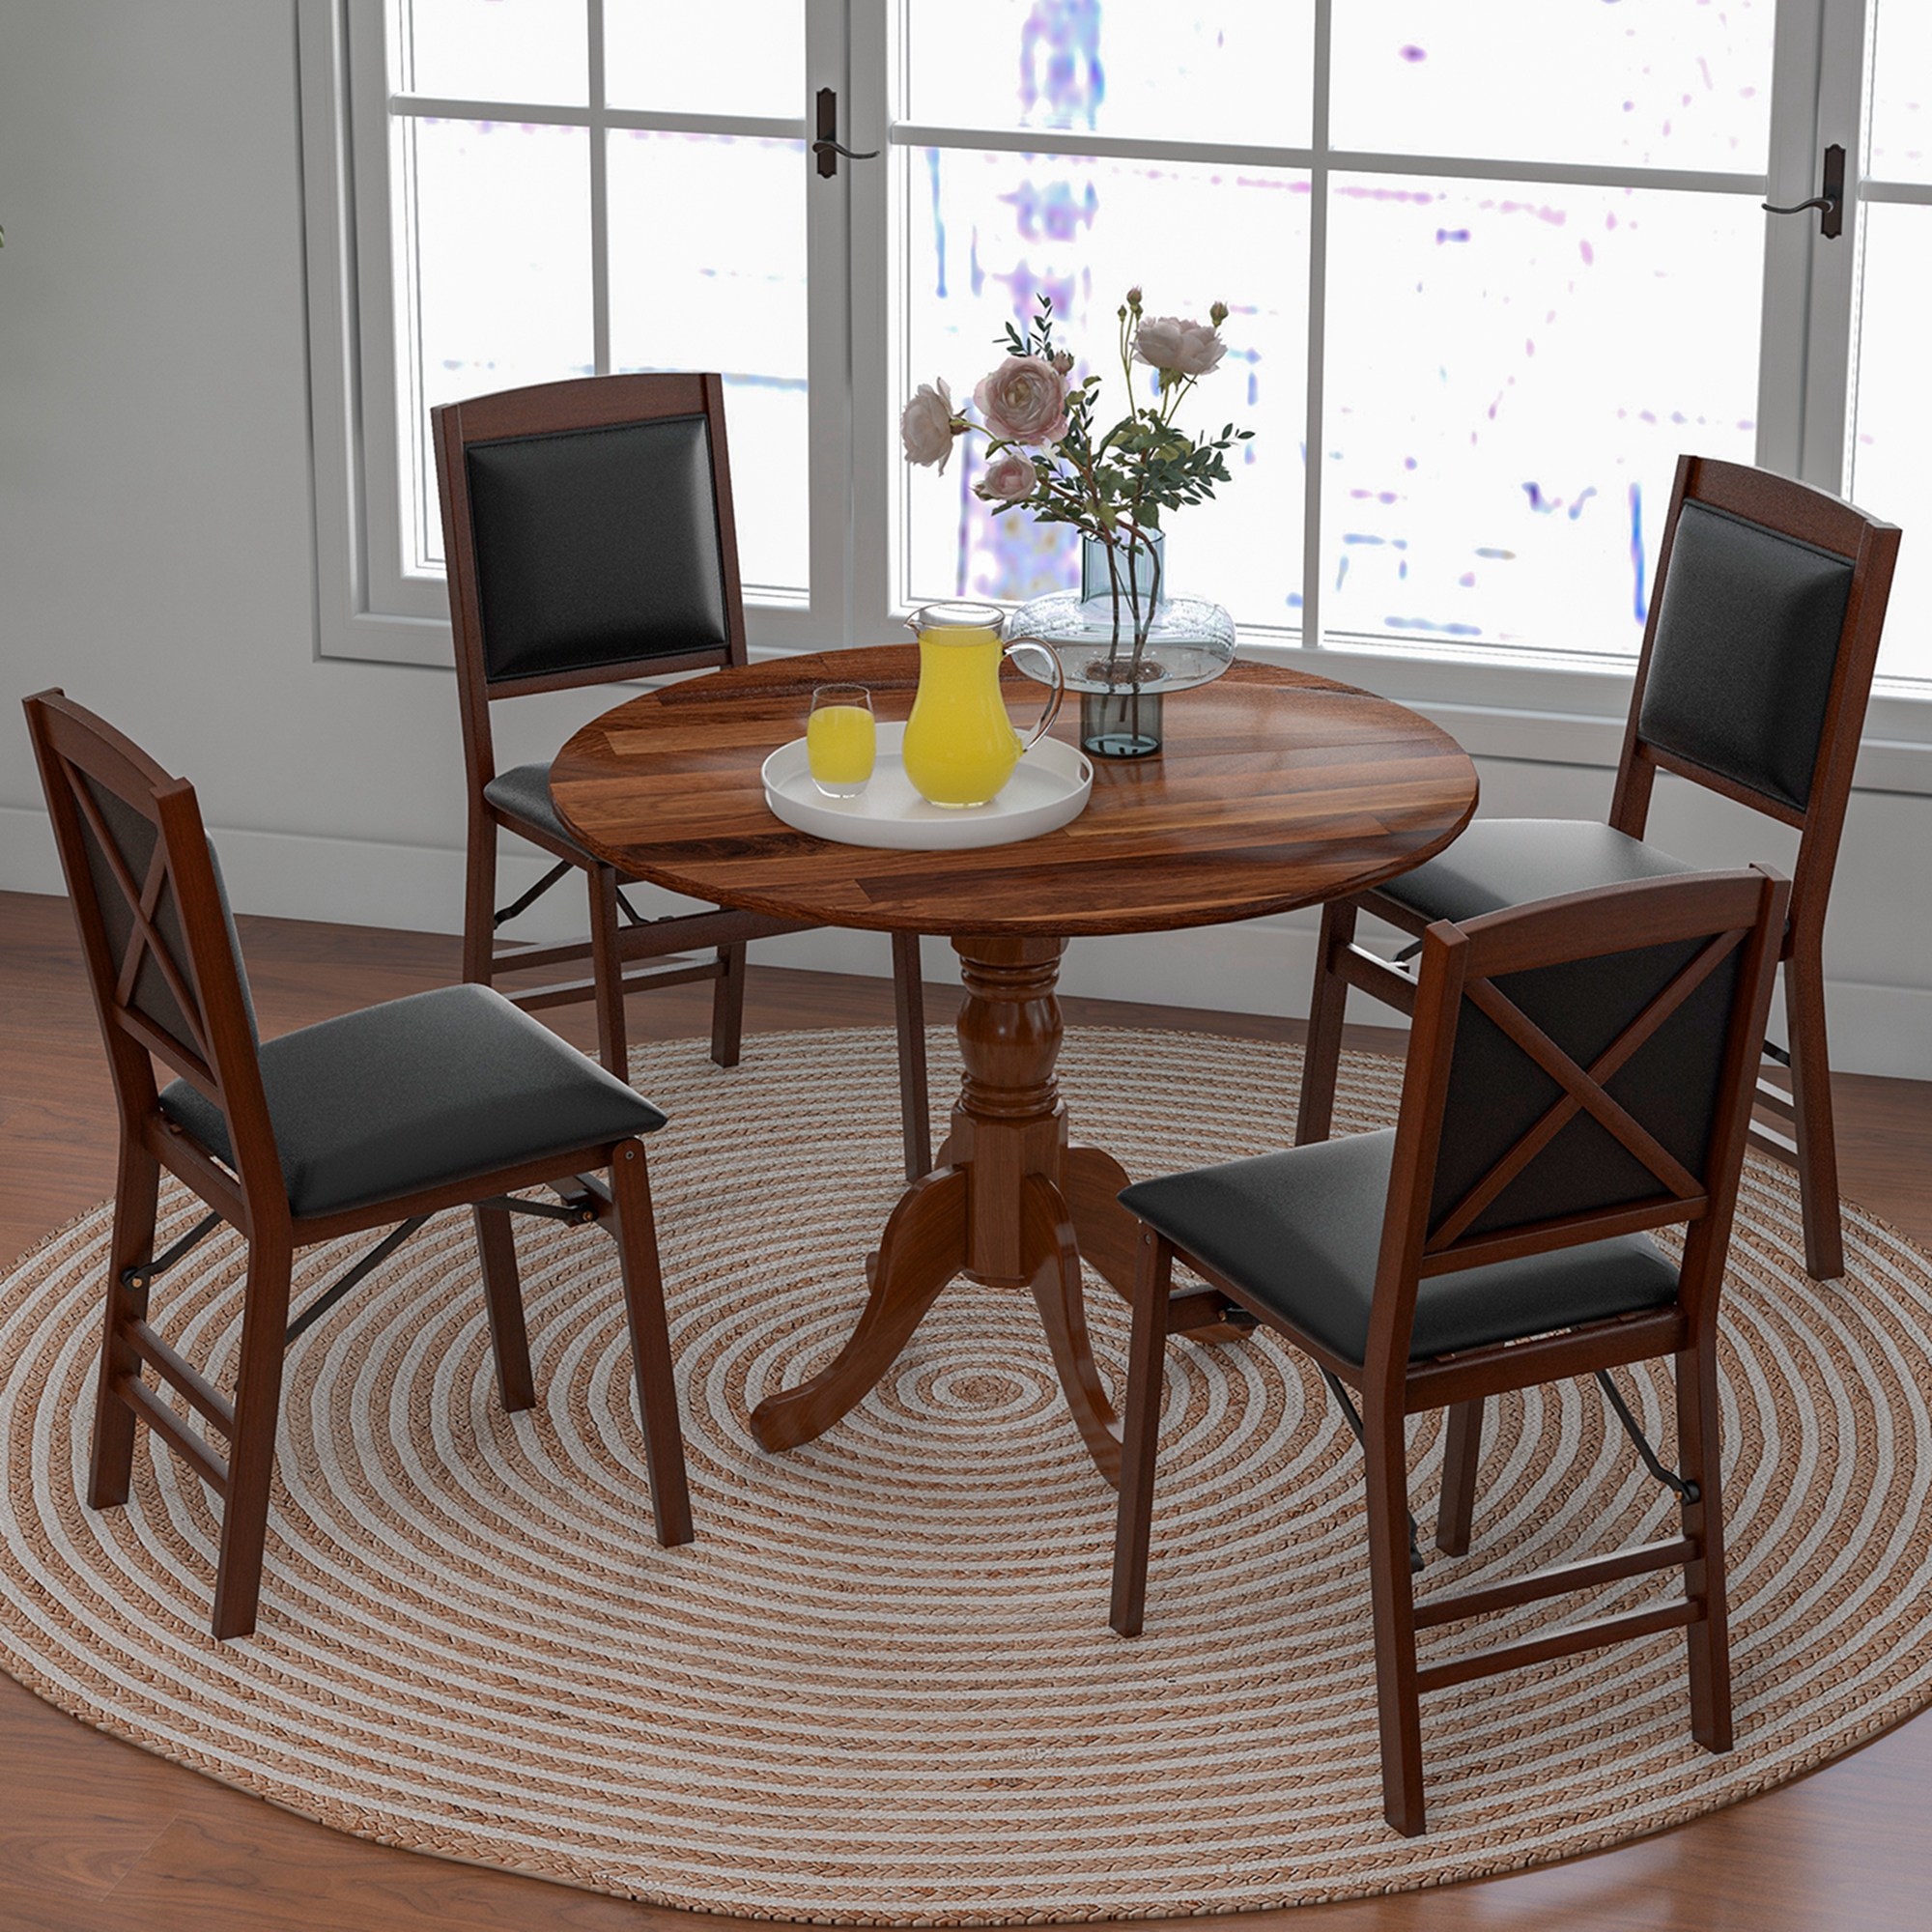 Costway Rustic Dining Table Wooden Dining Table with Round Tabletop & Curved Trestle Legs Walnut